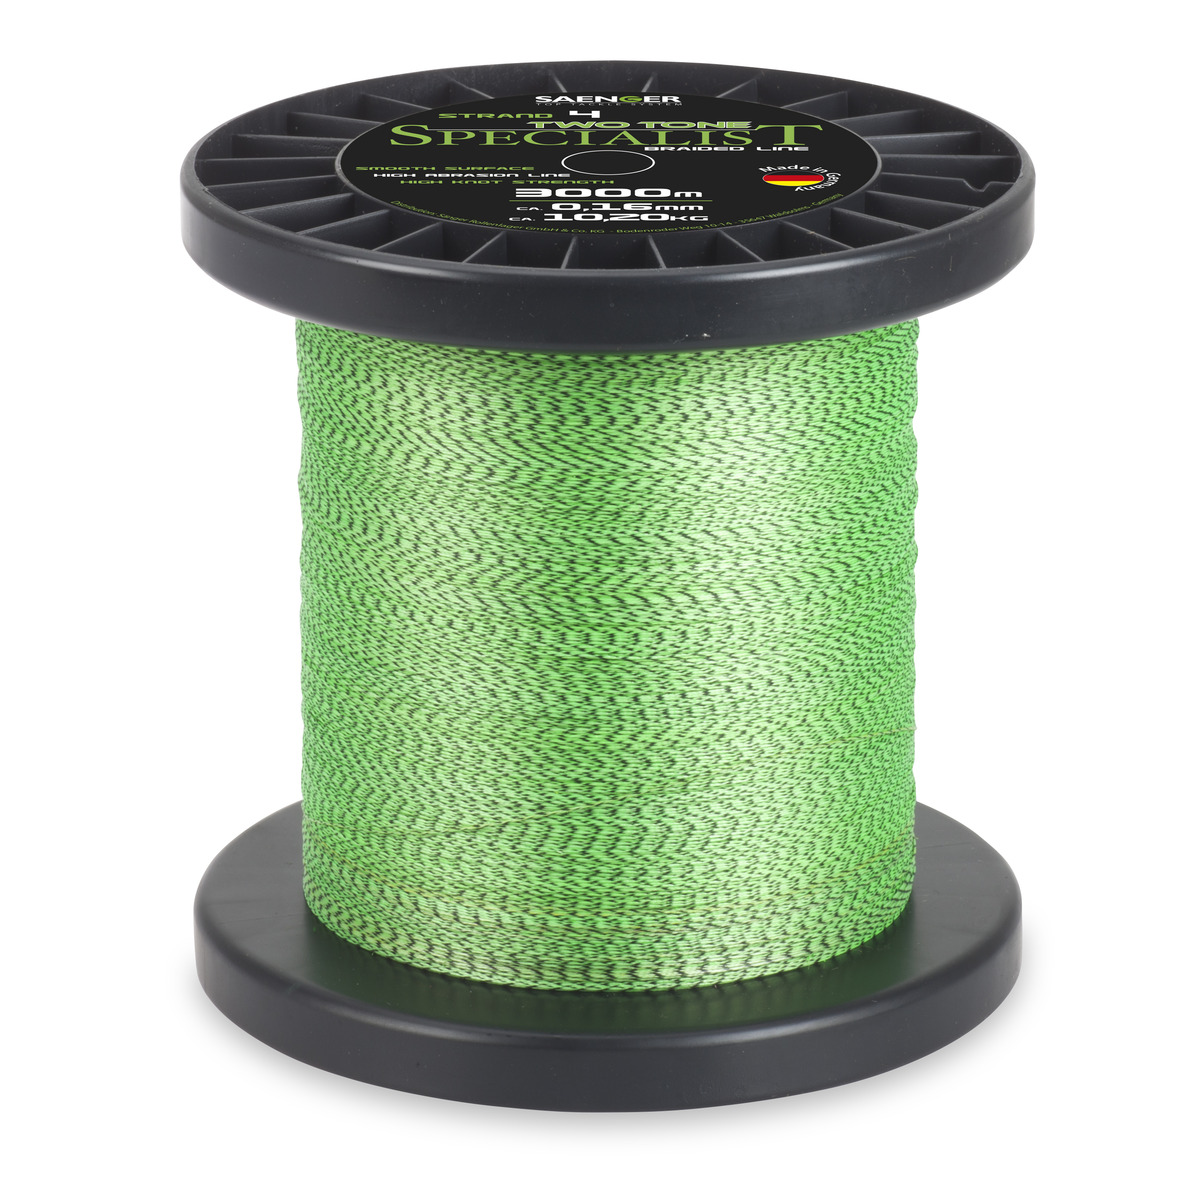 Saenger Specialist Two Tone Fluo Braid - 0,40 mm - 29,3 kg 3000 m